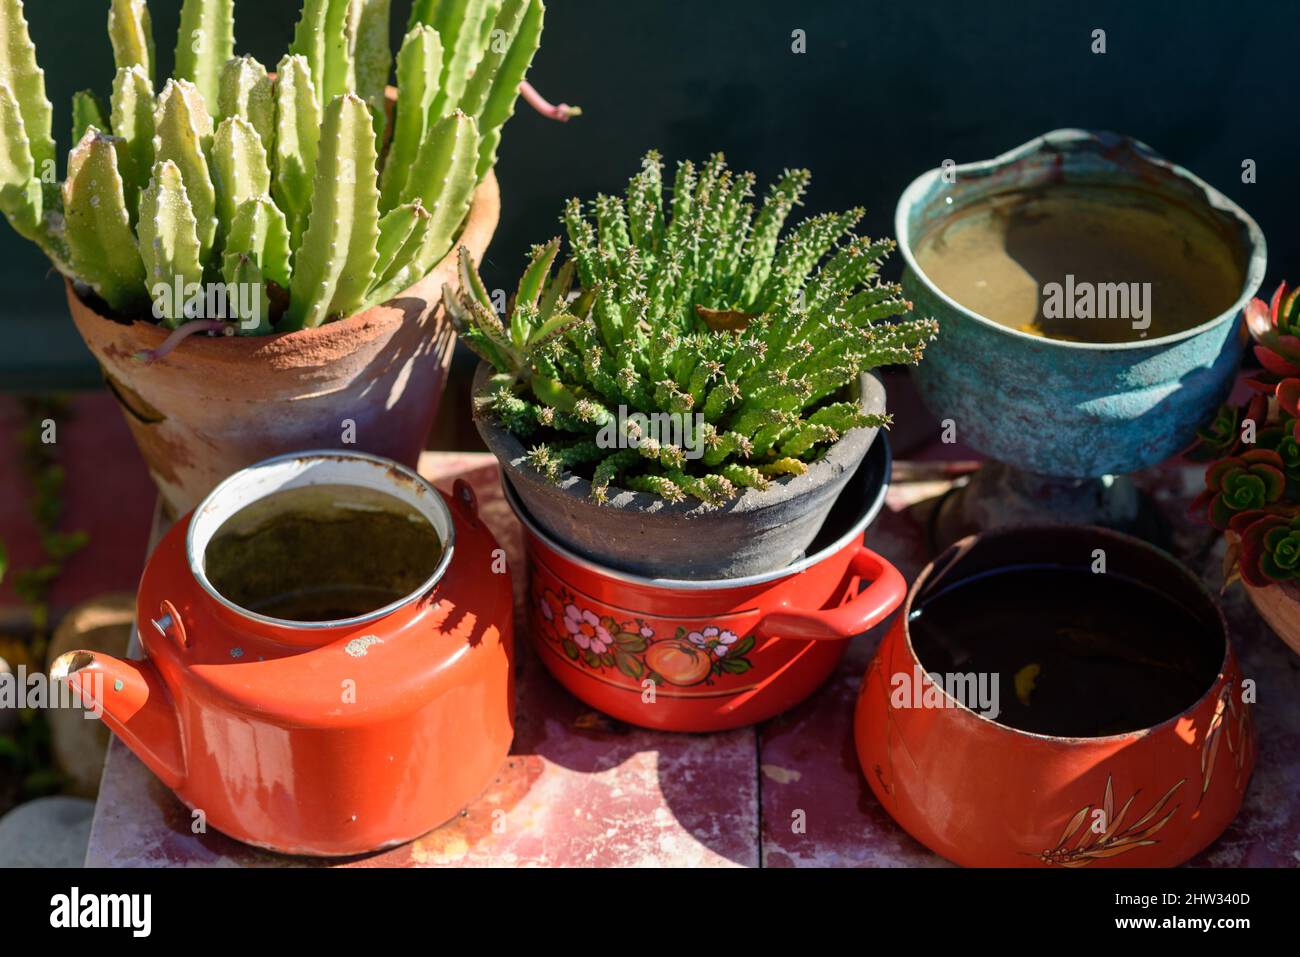 Succulent and cactus. Euphorbia and Stapelia plants Design garden. Reused garden design and low-waste lifestyle. Stock Photo